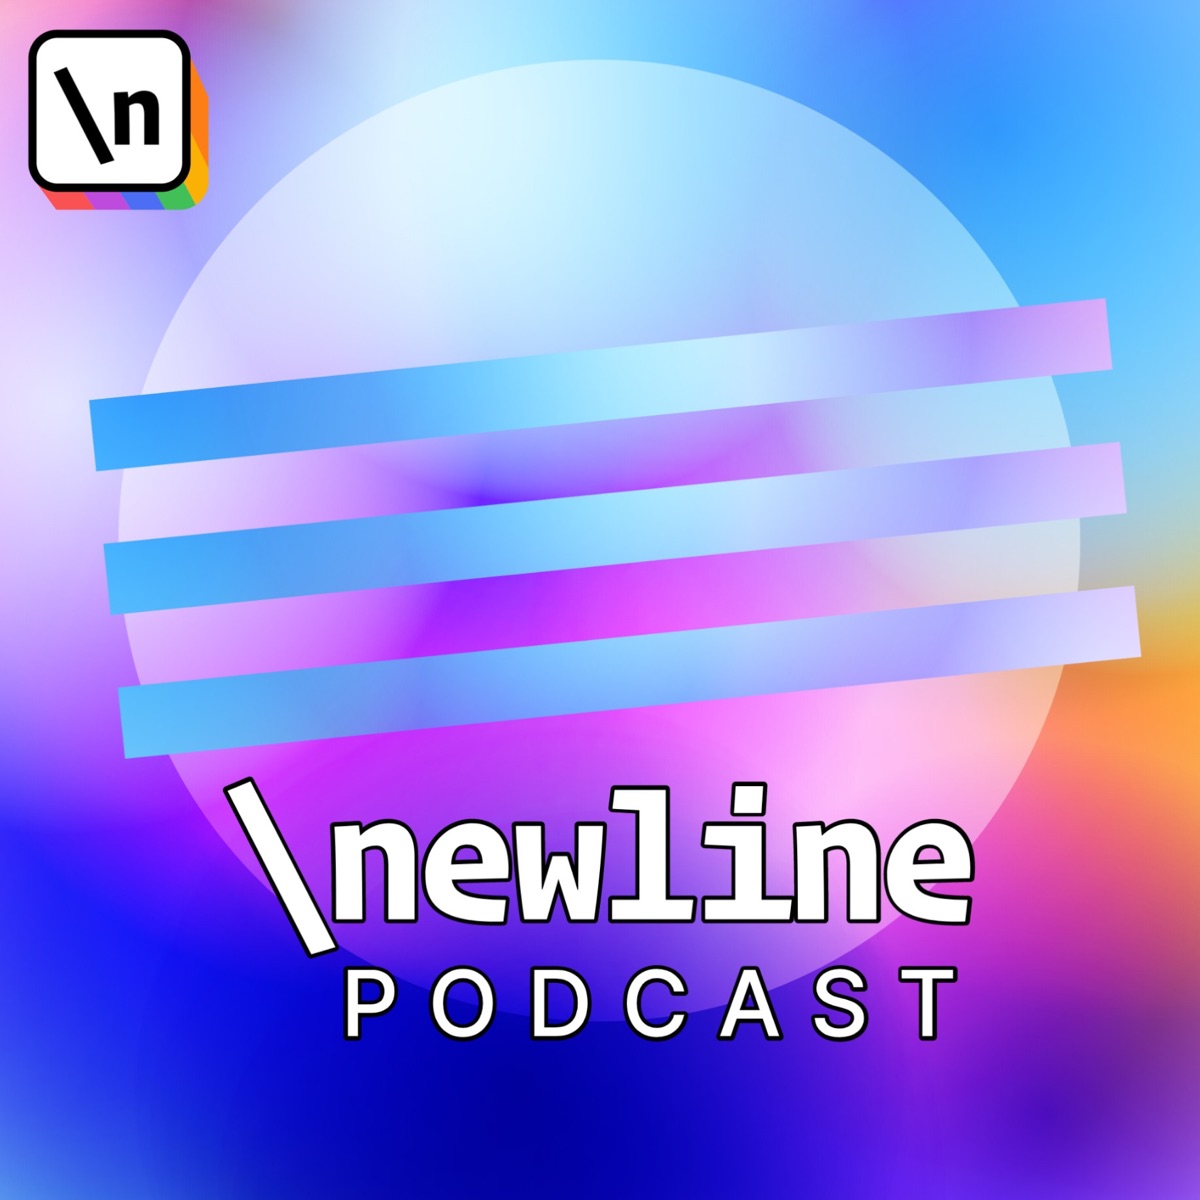 Newline Podcast Podtail - roblox gamers library podcast podtail